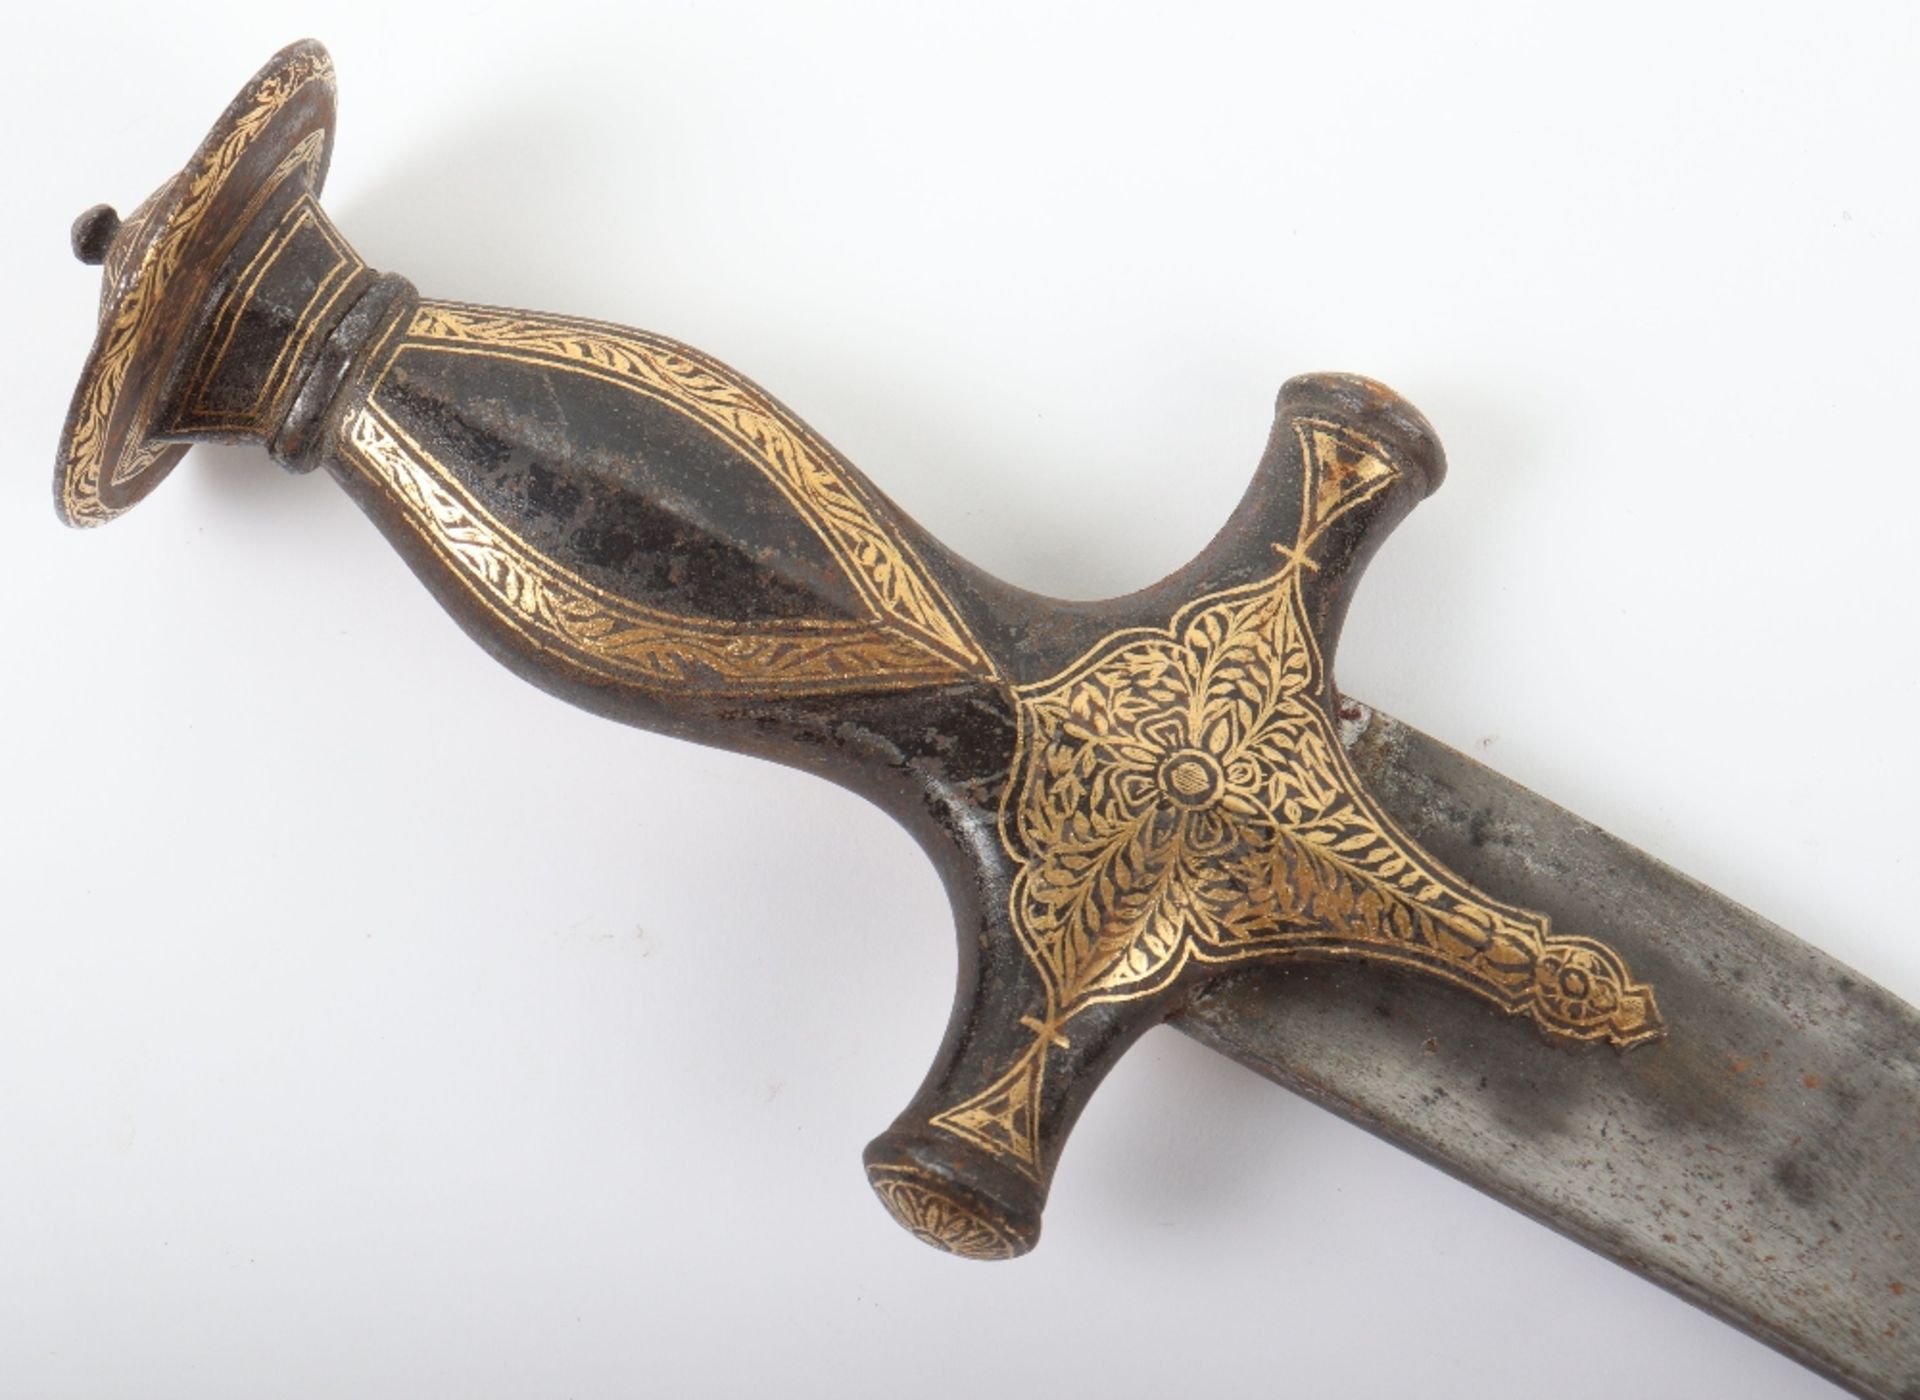 Decorative Indian Sword Tulwar Perhaps for a Youth - Image 9 of 13